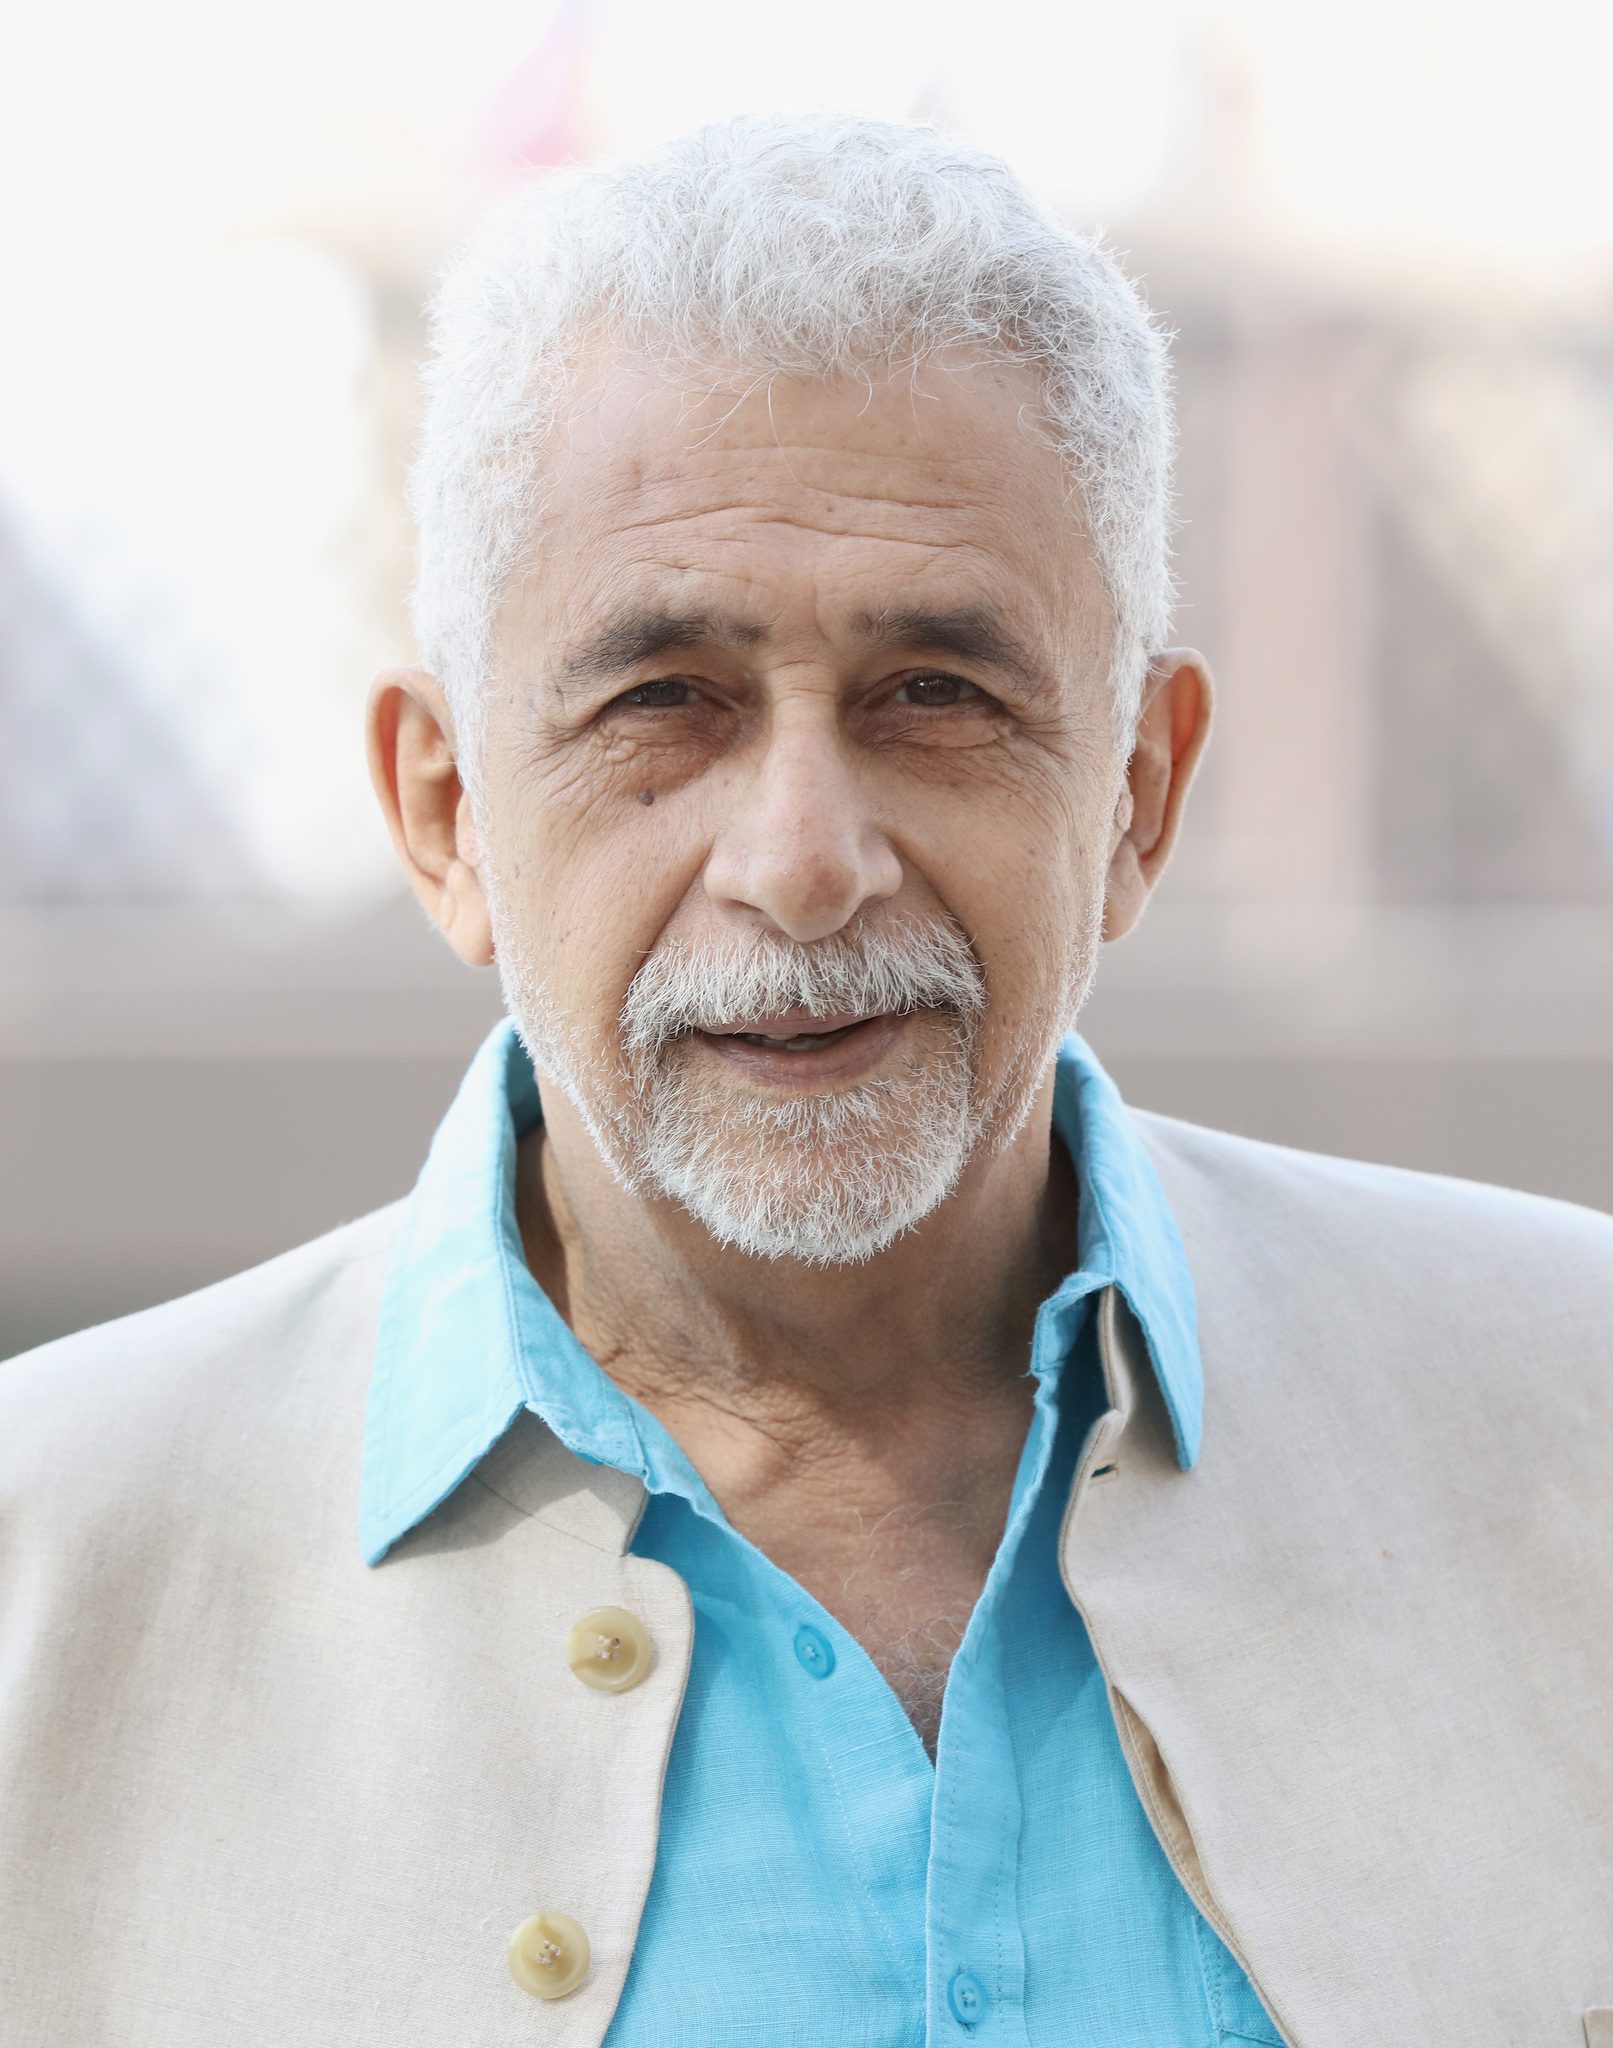 Naseeruddin Shah: Biography, Age, Height, Education, Family, Career & more.